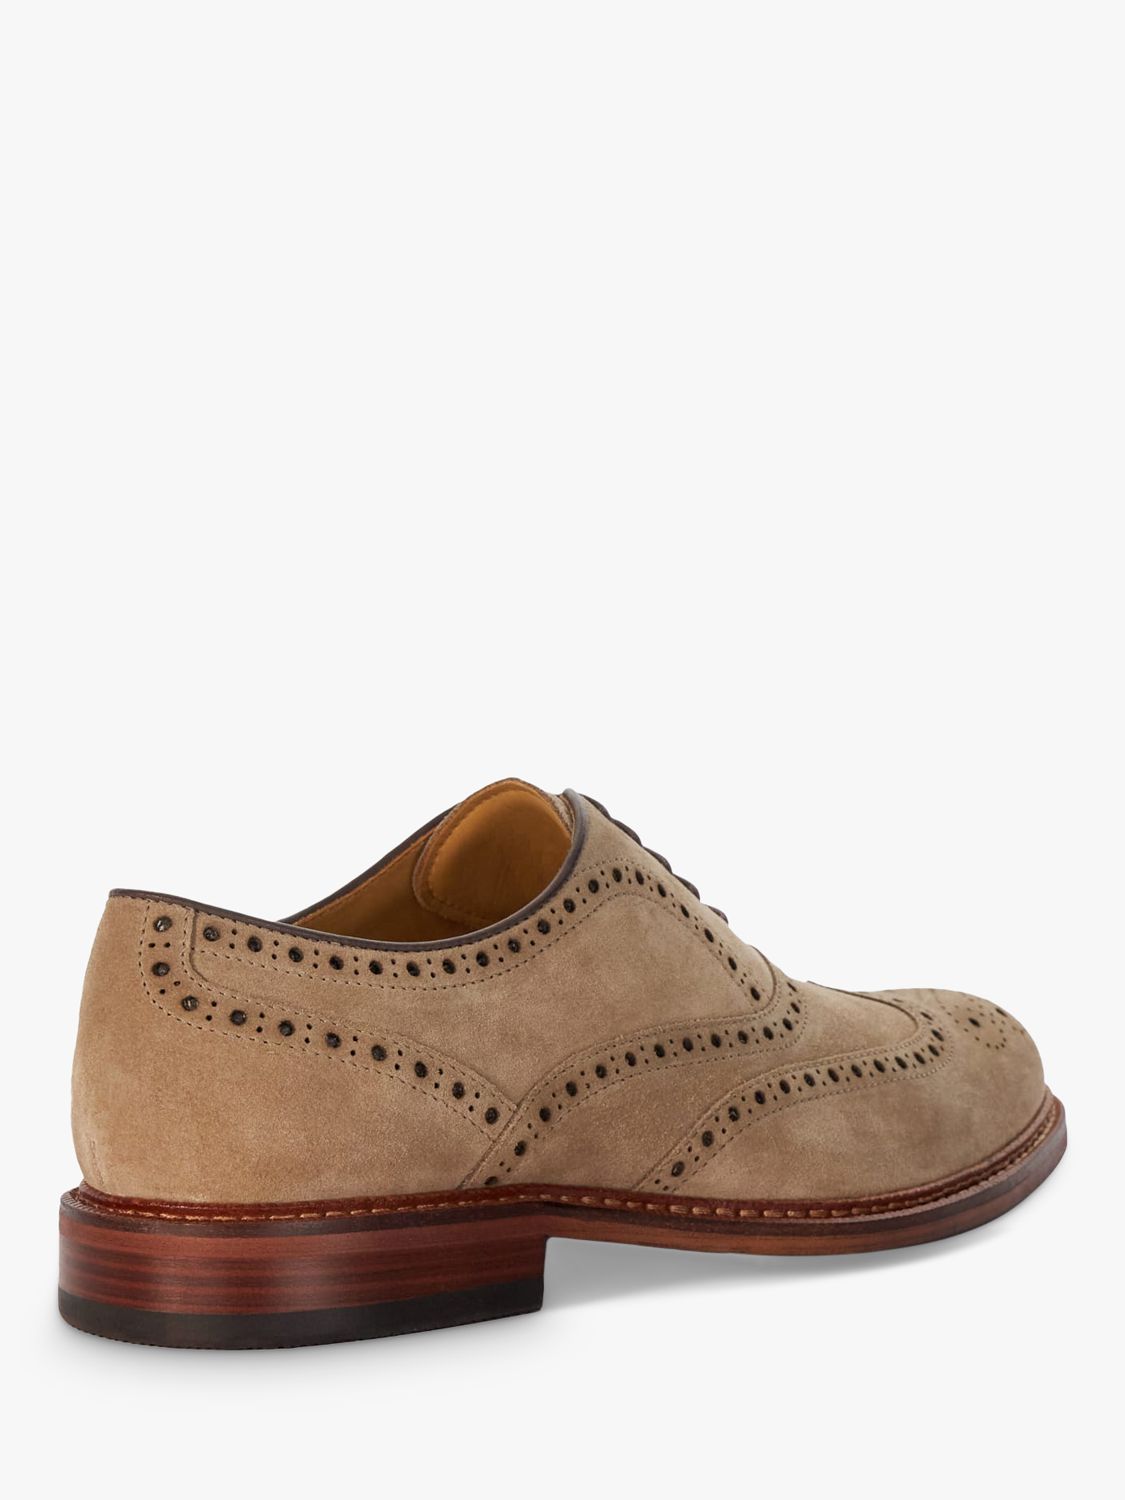 Buy Dune Solihull Suede Oxford Brogue Shoes Online at johnlewis.com